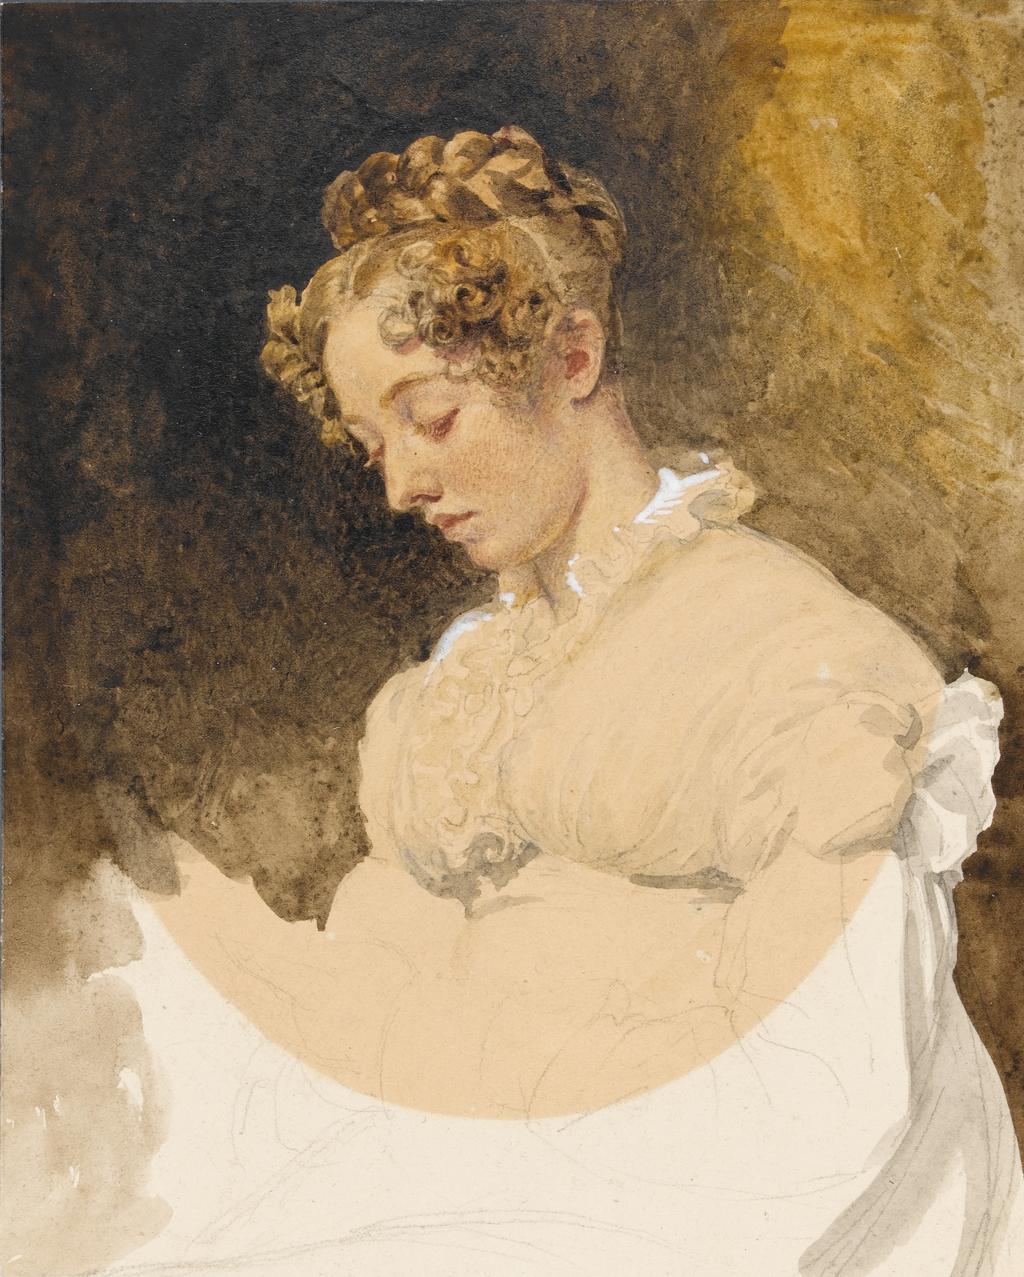 An image of Title/s: Portrait of Harriet de Wint Maker/s: Hilton, William (II) (draughtsman) [ULAN info: British artist, 1786-1839]Technique Description: watercolour and white bodycolour highlights over traces of graphite on paper, laid downDimensions: height: 142 mm, width: 114 mm  